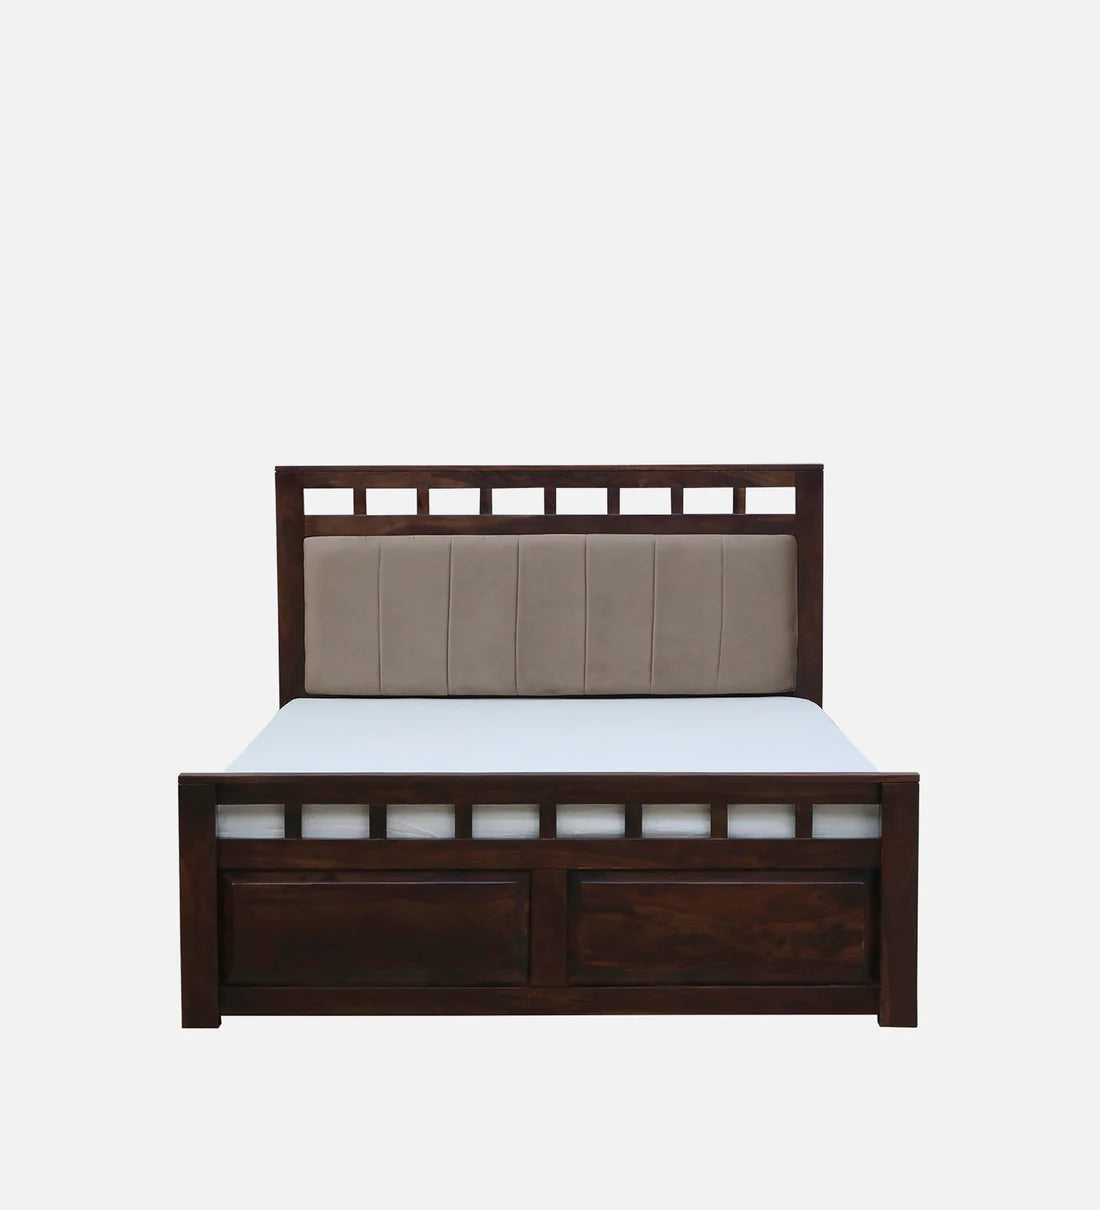 Sheesham Wood King Size Bed In Scratch Resistant Provincial Teak Finish With Drawer Storage